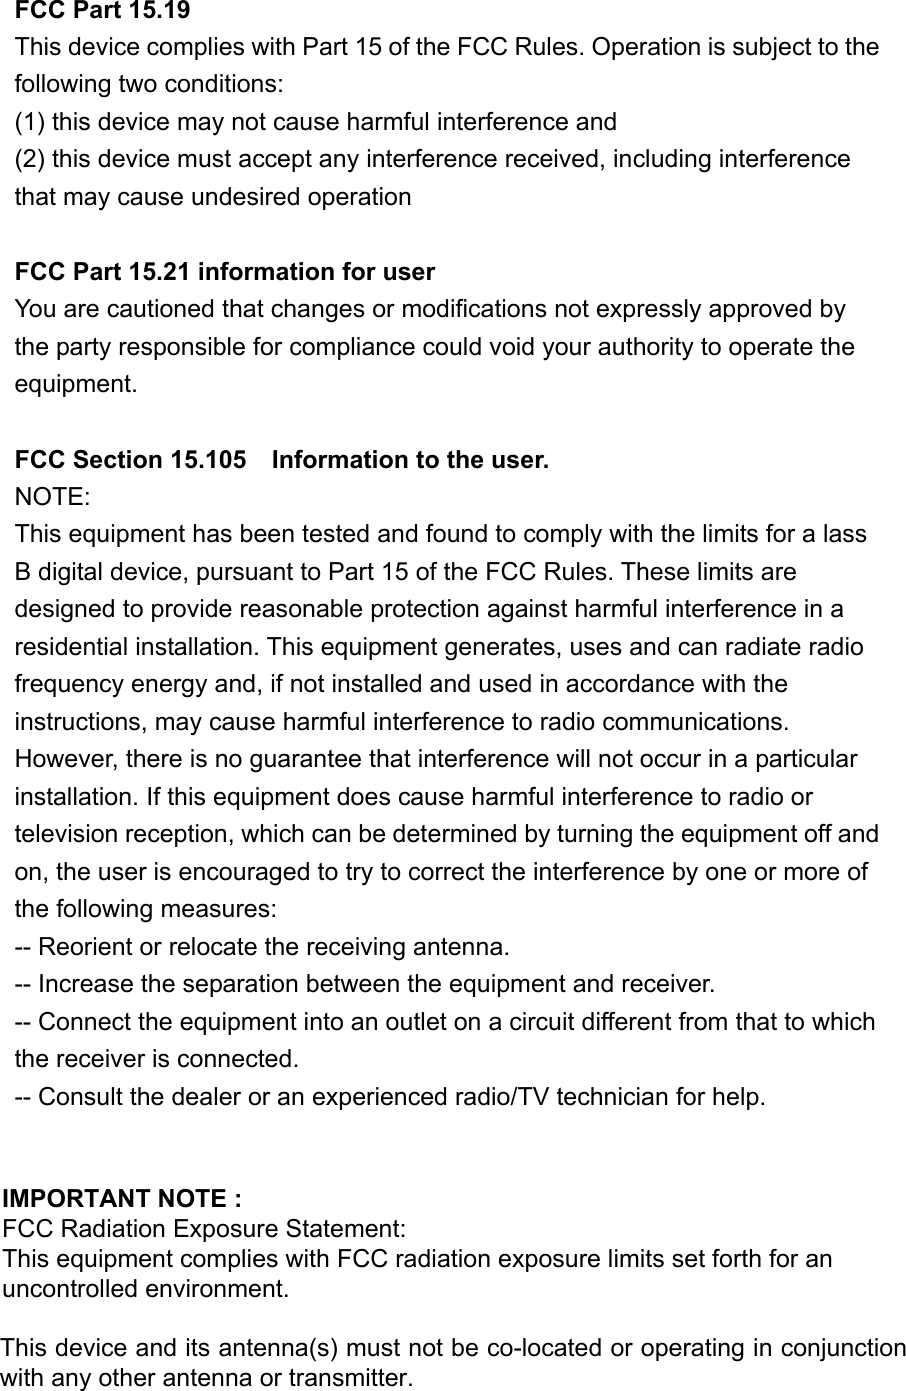 FCC Part 15.19 This device complies with Part 15 of the FCC Rules. Operation is subject to the following two conditions:   (1) this device may not cause harmful interference and   (2) this device must accept any interference received, including interference that may cause undesired operation  FCC Part 15.21 information for user You are cautioned that changes or modifications not expressly approved by the party responsible for compliance could void your authority to operate the equipment.  FCC Section 15.105    Information to the user. NOTE:   This equipment has been tested and found to comply with the limits for a lass B digital device, pursuant to Part 15 of the FCC Rules. These limits are designed to provide reasonable protection against harmful interference in a residential installation. This equipment generates, uses and can radiate radio frequency energy and, if not installed and used in accordance with the instructions, may cause harmful interference to radio communications. However, there is no guarantee that interference will not occur in a particular installation. If this equipment does cause harmful interference to radio or television reception, which can be determined by turning the equipment off and on, the user is encouraged to try to correct the interference by one or more of the following measures: -- Reorient or relocate the receiving antenna. -- Increase the separation between the equipment and receiver.   -- Connect the equipment into an outlet on a circuit different from that to which the receiver is connected.   -- Consult the dealer or an experienced radio/TV technician for help.    IMPORTANT NOTE :  FCC Radiation Exposure Statement:  This equipment complies with FCC radiation exposure limits set forth for an    uncontrolled environment. This device and its antenna(s) must not be co-located or operating in conjunction with any other antenna or transmitter.    